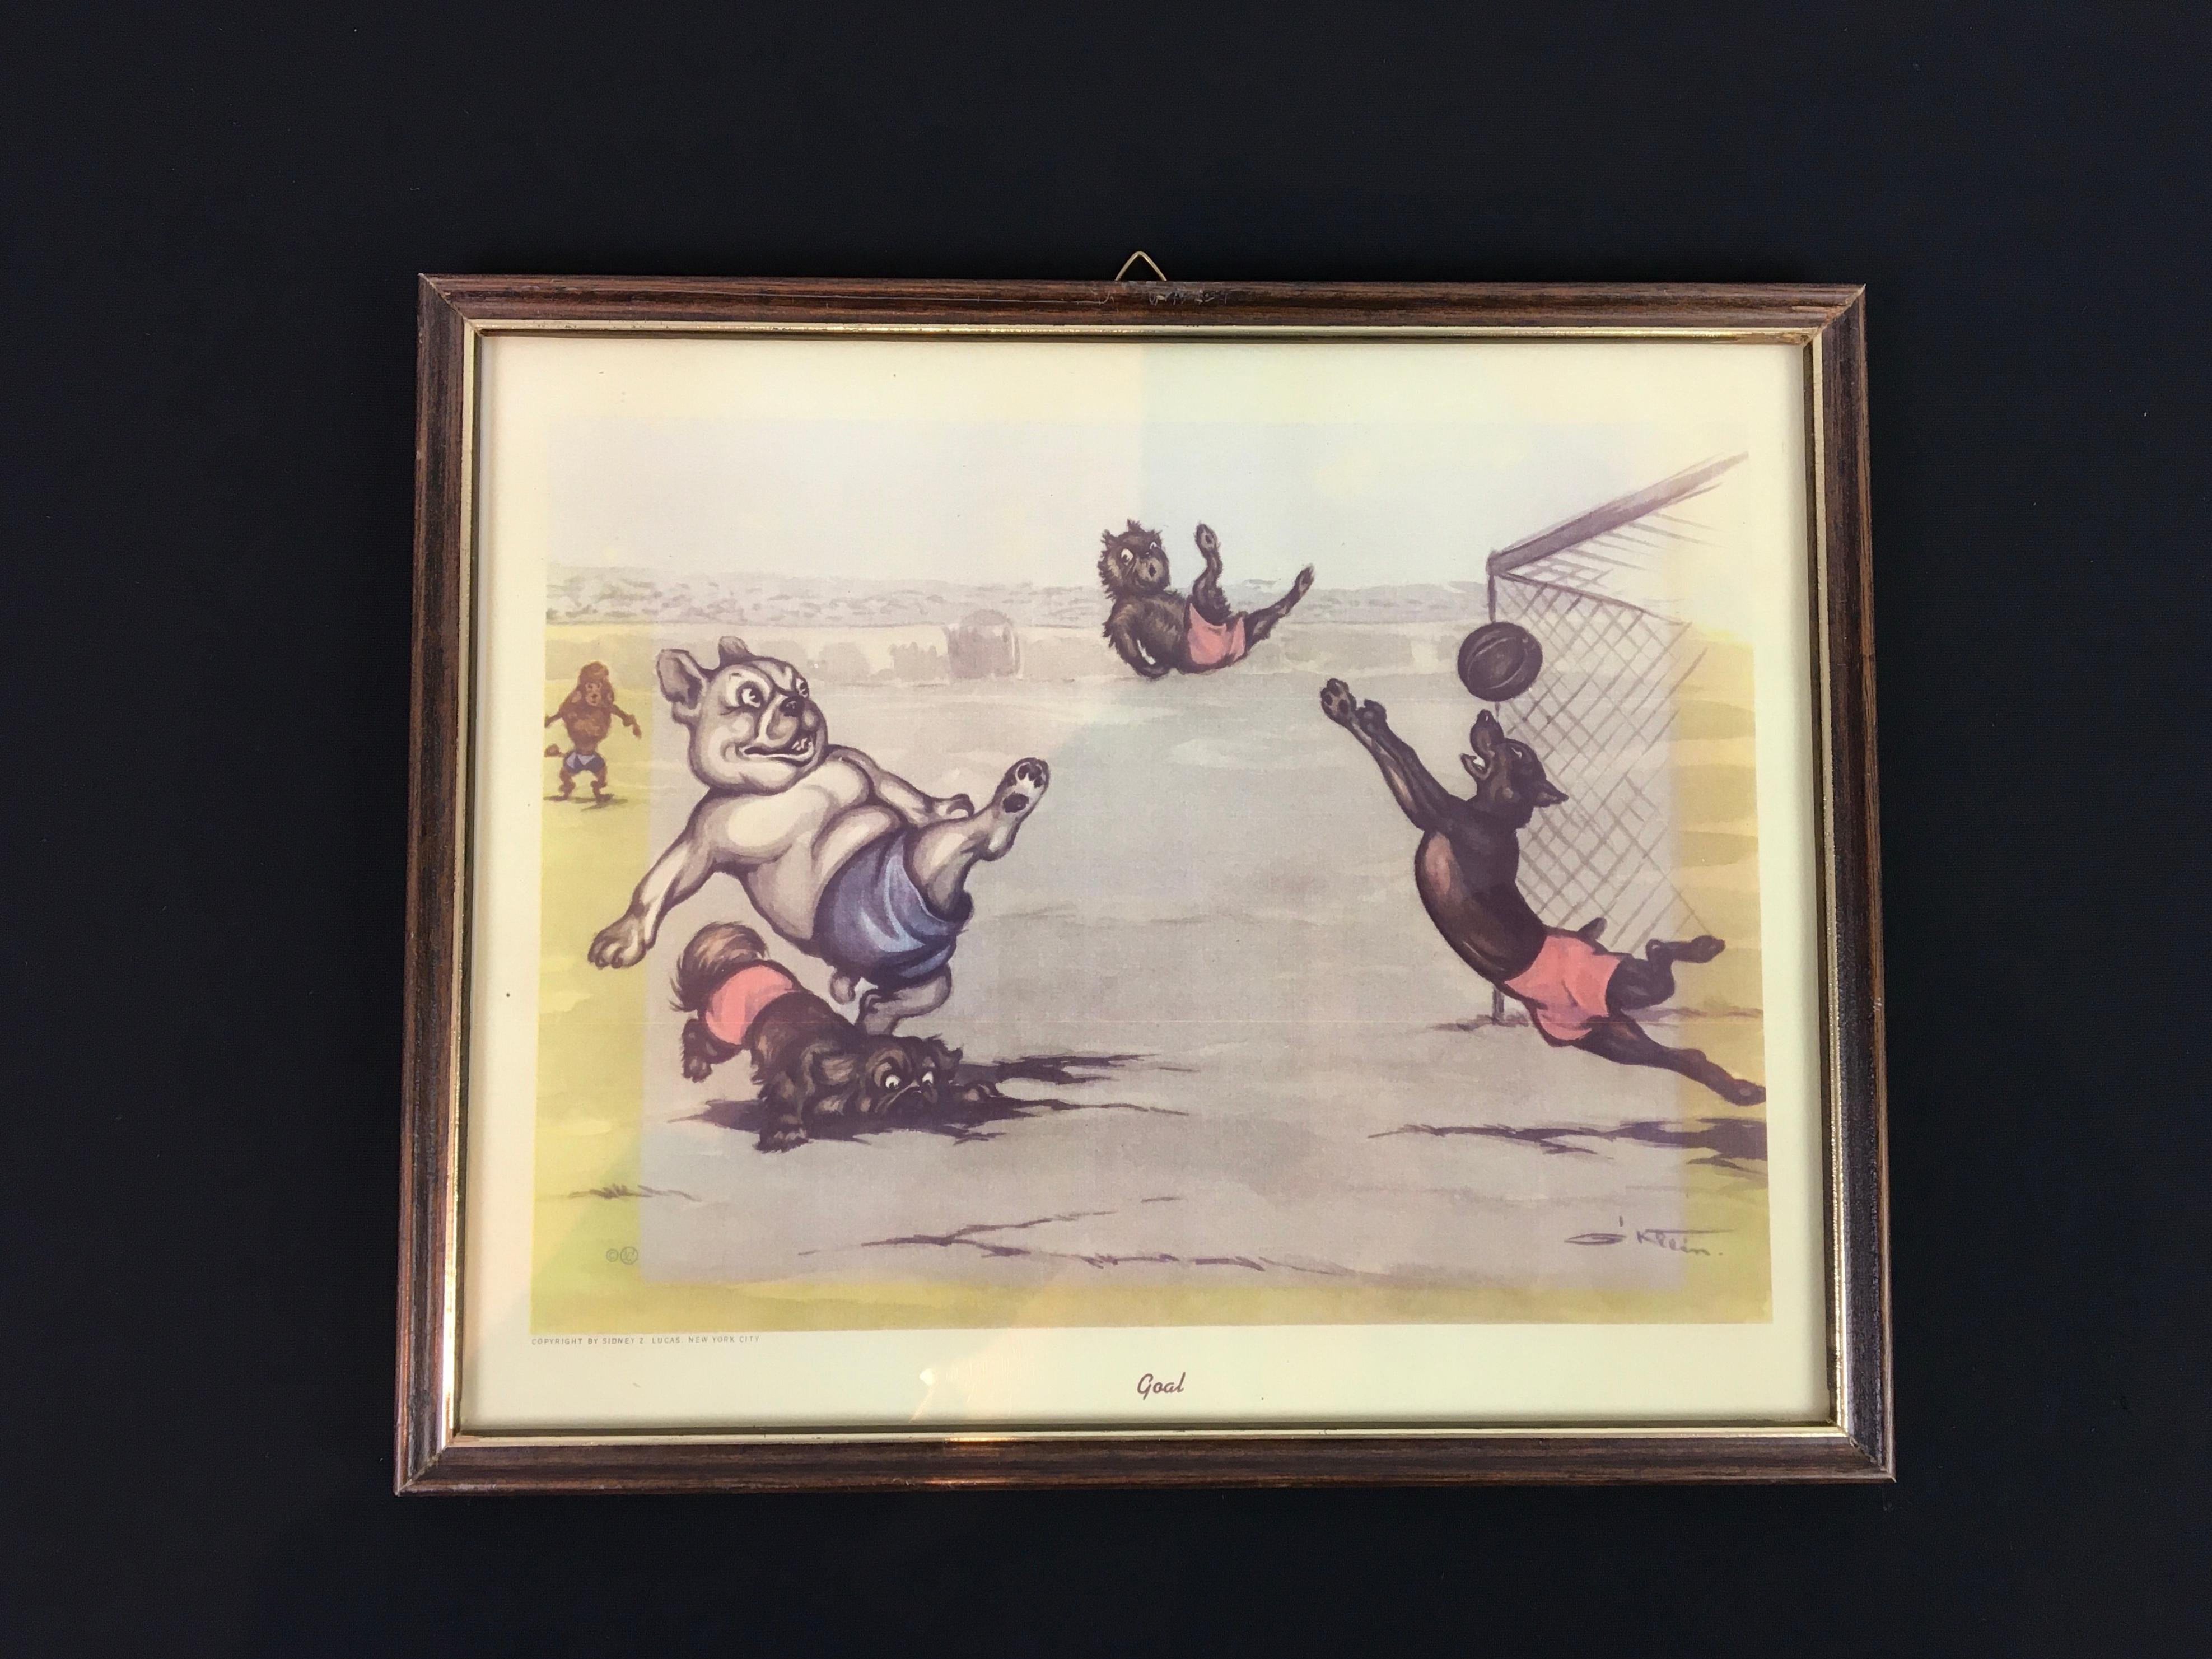 Framed print of dogs playing football and making a goal. 
Ilustrated by Boris O' Klein. 
Boris O' Klein was A French artist and cartoonist. 
Also known as an anthropomorphic artist, known for his numerous prints and watercolors of dogs getting up